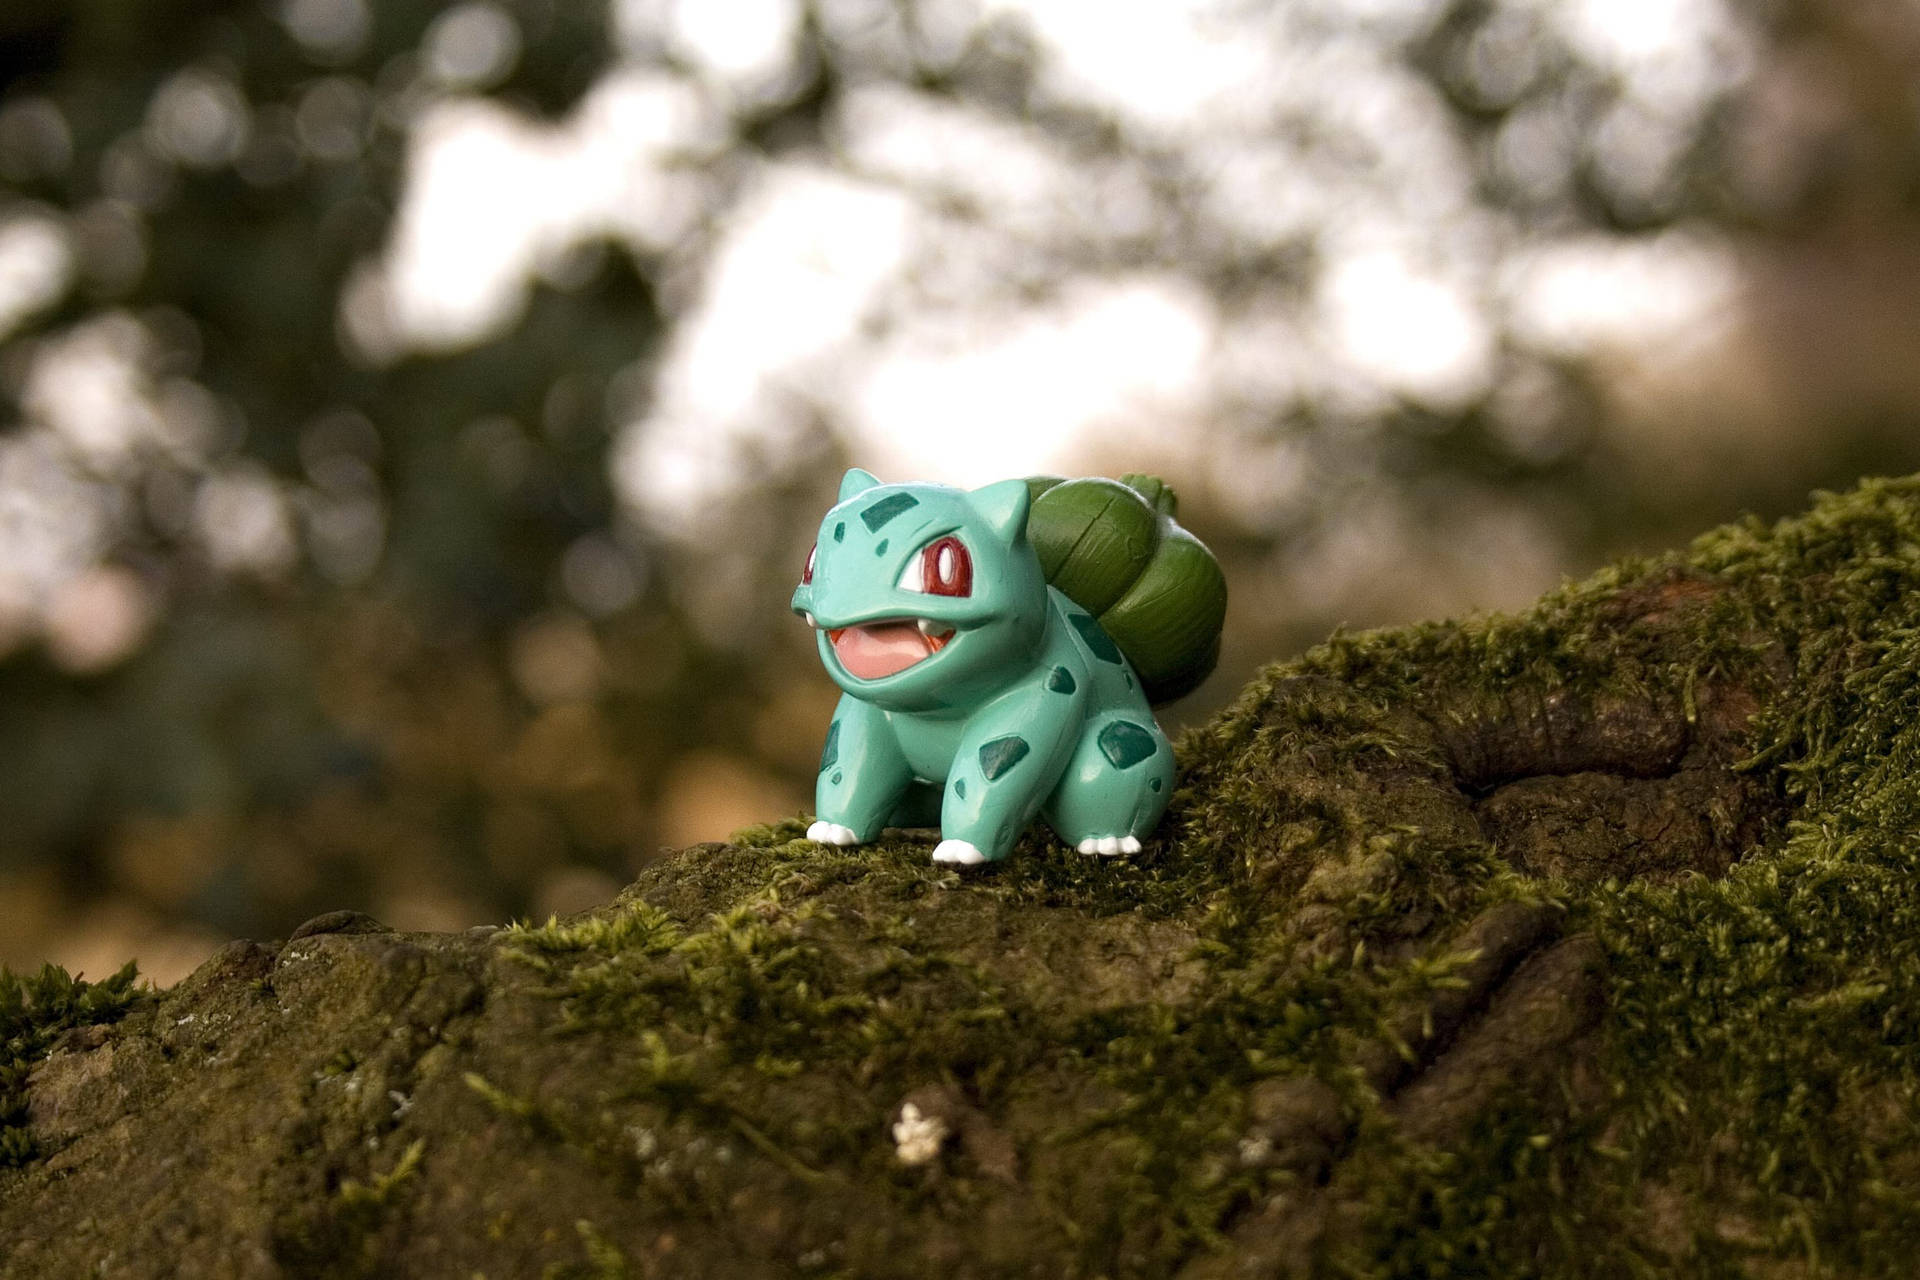 Get Your Own Tiny Bulbasaur Toy Background